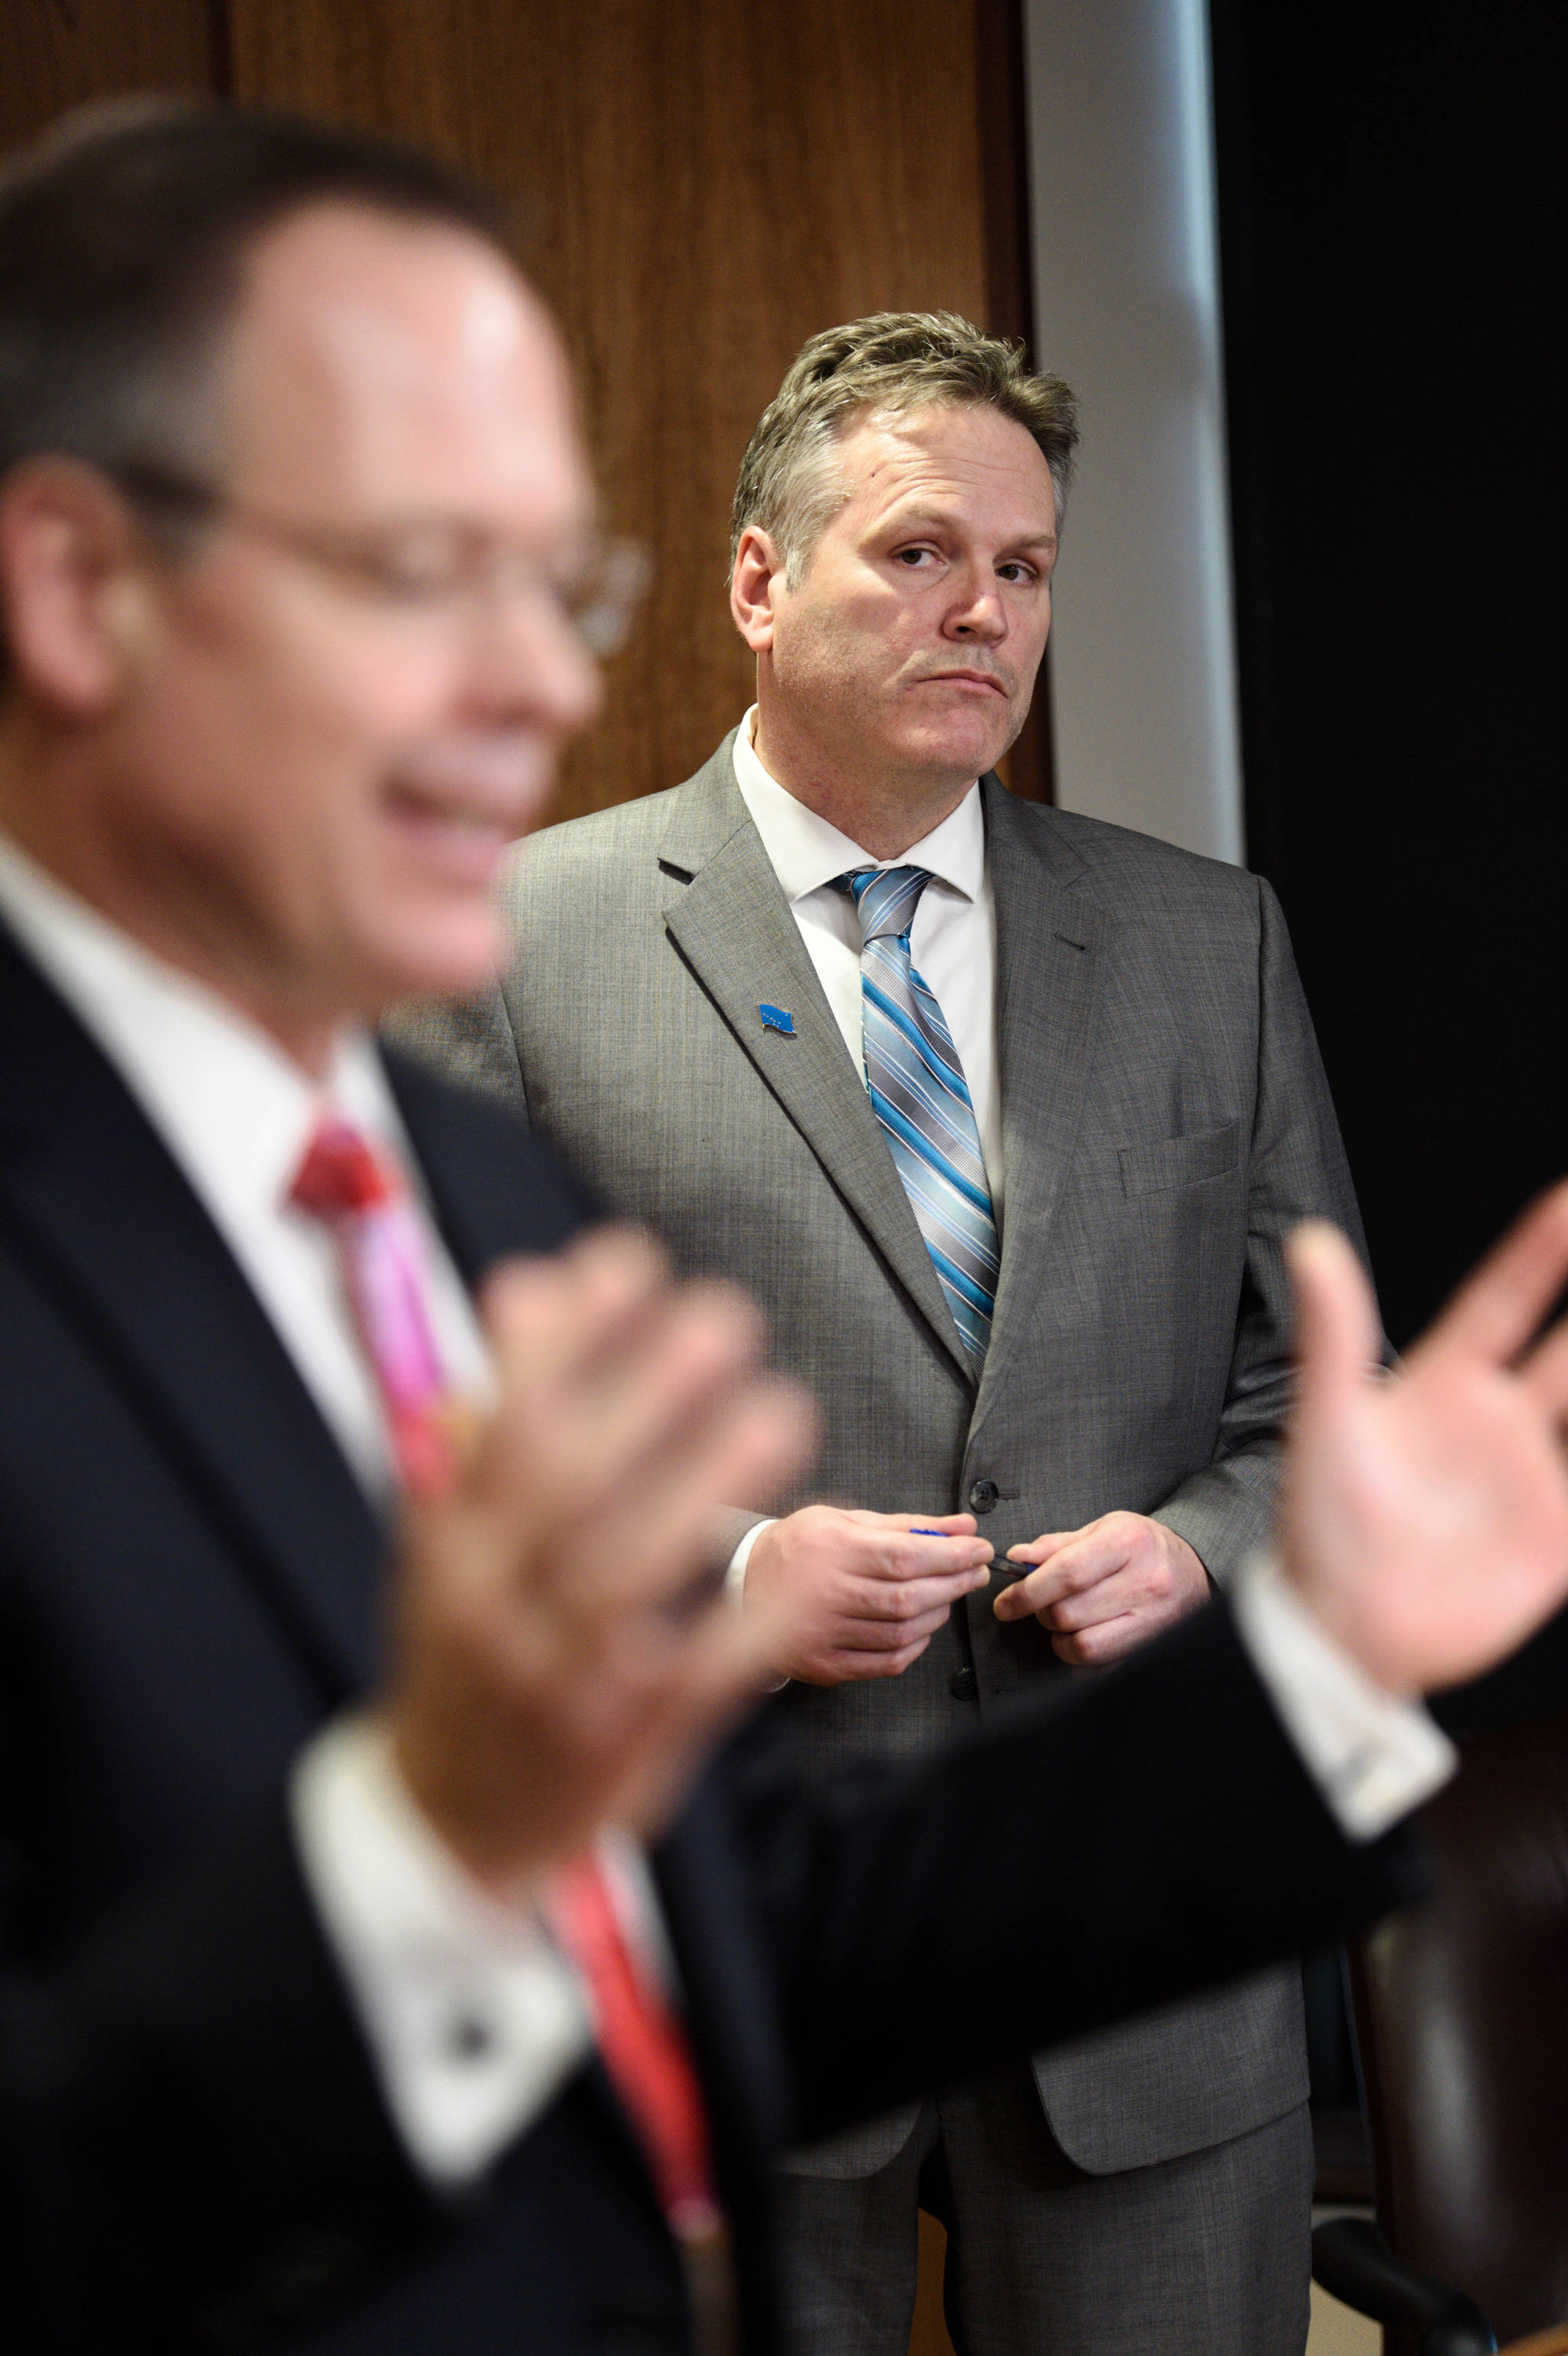 Commissioner Designee Bruce Tangeman presents bills to pay residents cut PFD funds as Gov. Mike Dunleavy watches during a press conference at the Capitol on Wednesday, Jan. 16, 2019. (Michael Penn | Juneau Empire)